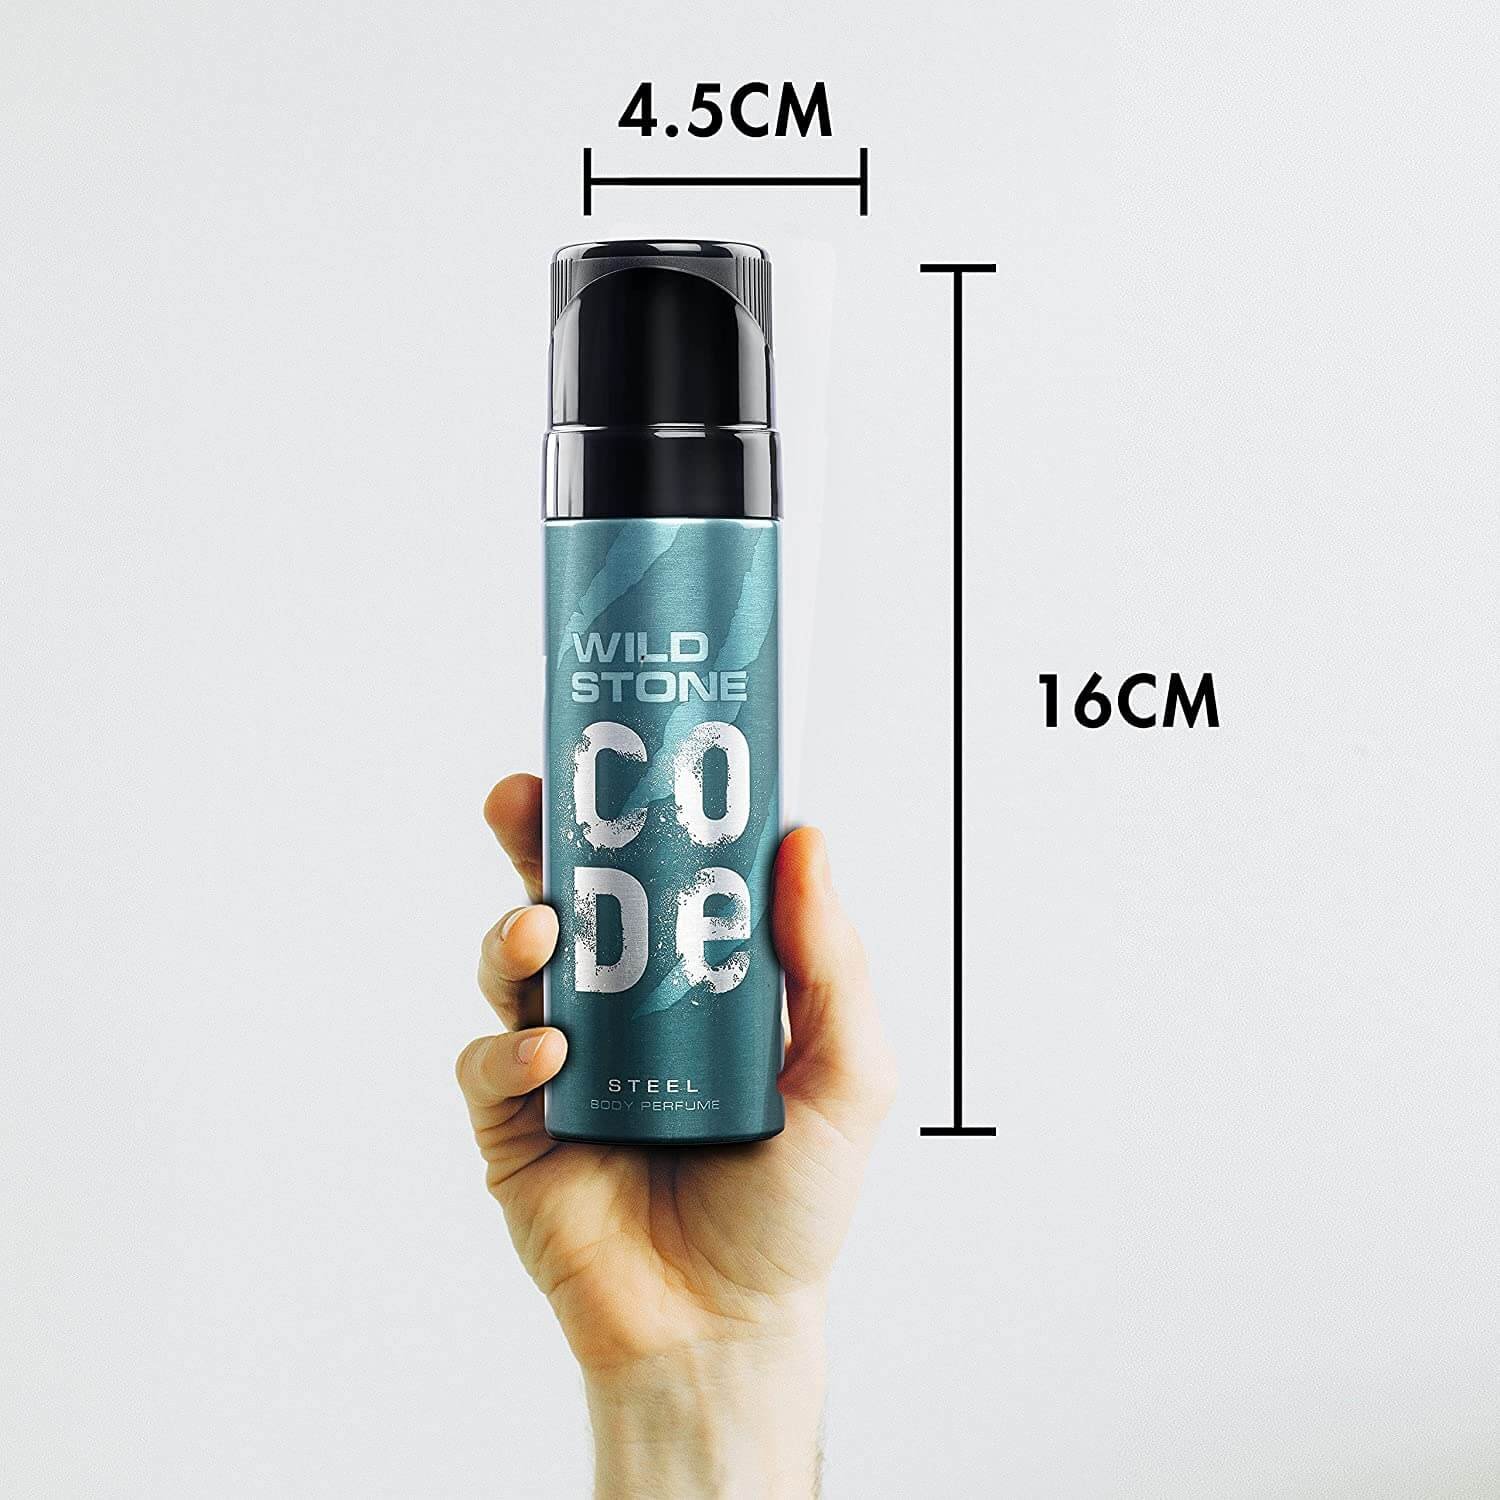 https://shoppingyatra.com/product_images/Wild Stone Code Steel No Gas Body Perfume for Men, Long Lasting Refreshing Fragrance for Office Wear -120 ml1.jpg